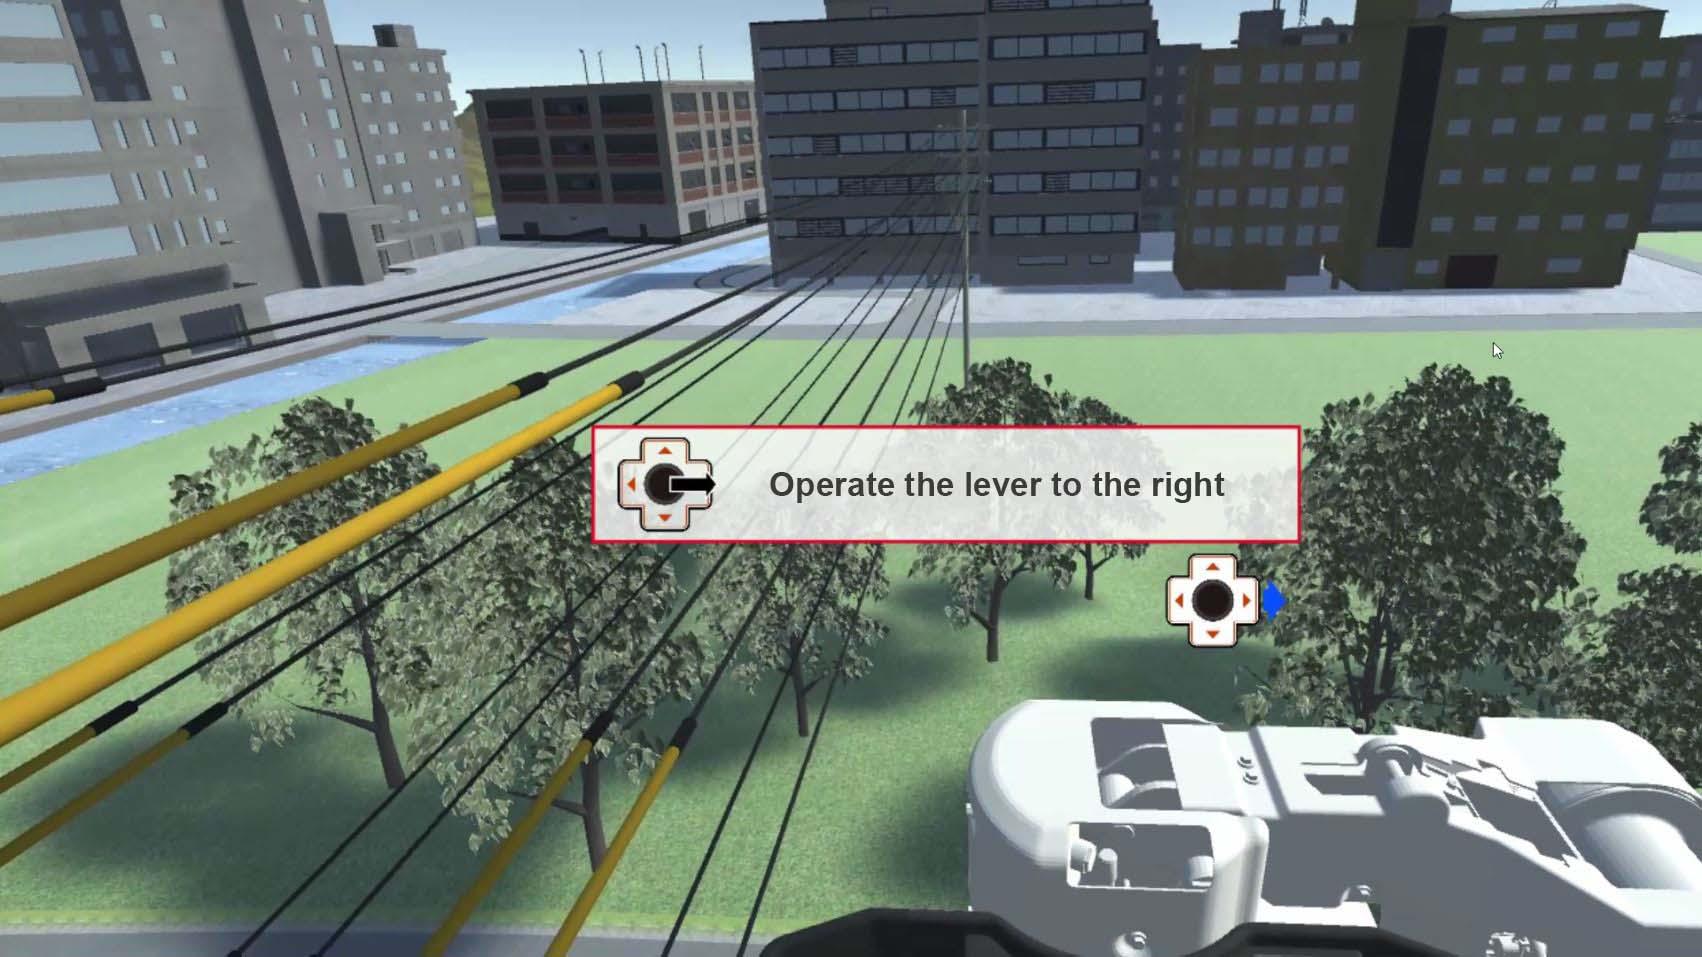 The vivid nature of VR along with the training guidance can help operators avoid potential accidents and work their way safely out of a dangerous situation.